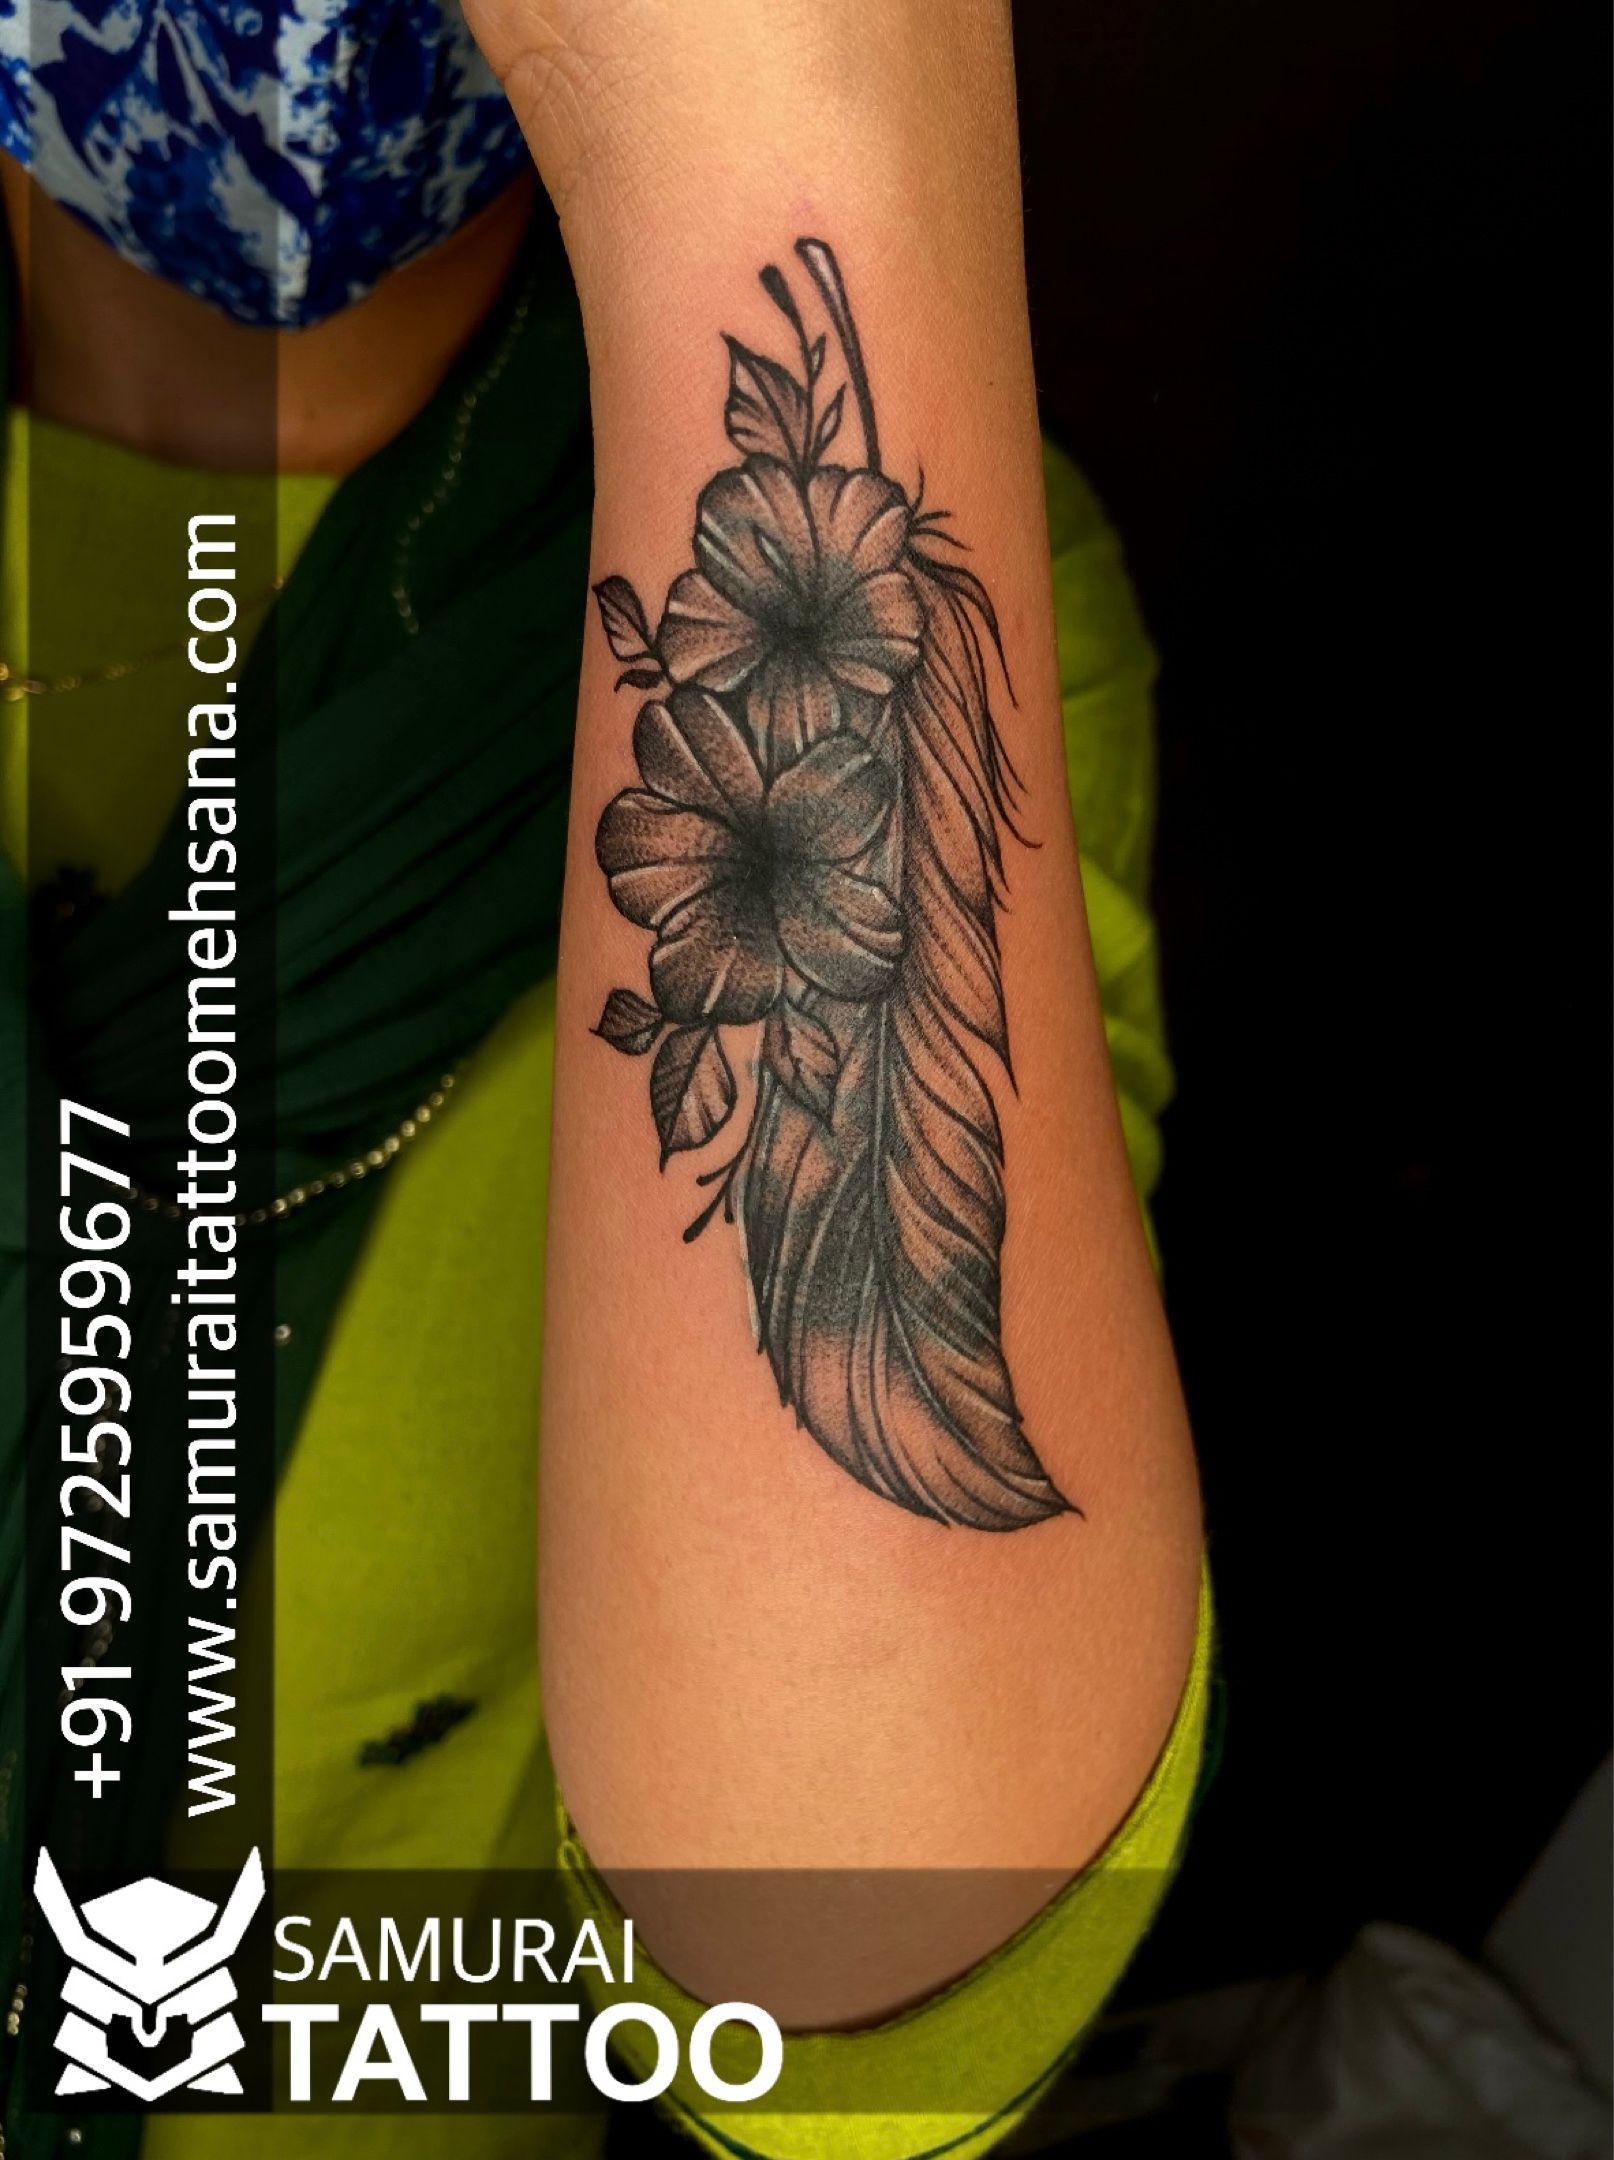 Feather tattoo on forearm coverup by Dmitriy Nik coverup Dmitriy feather  Forearm Nik   Cover   Cover up tattoos Cover tattoo Feather  tattoo design